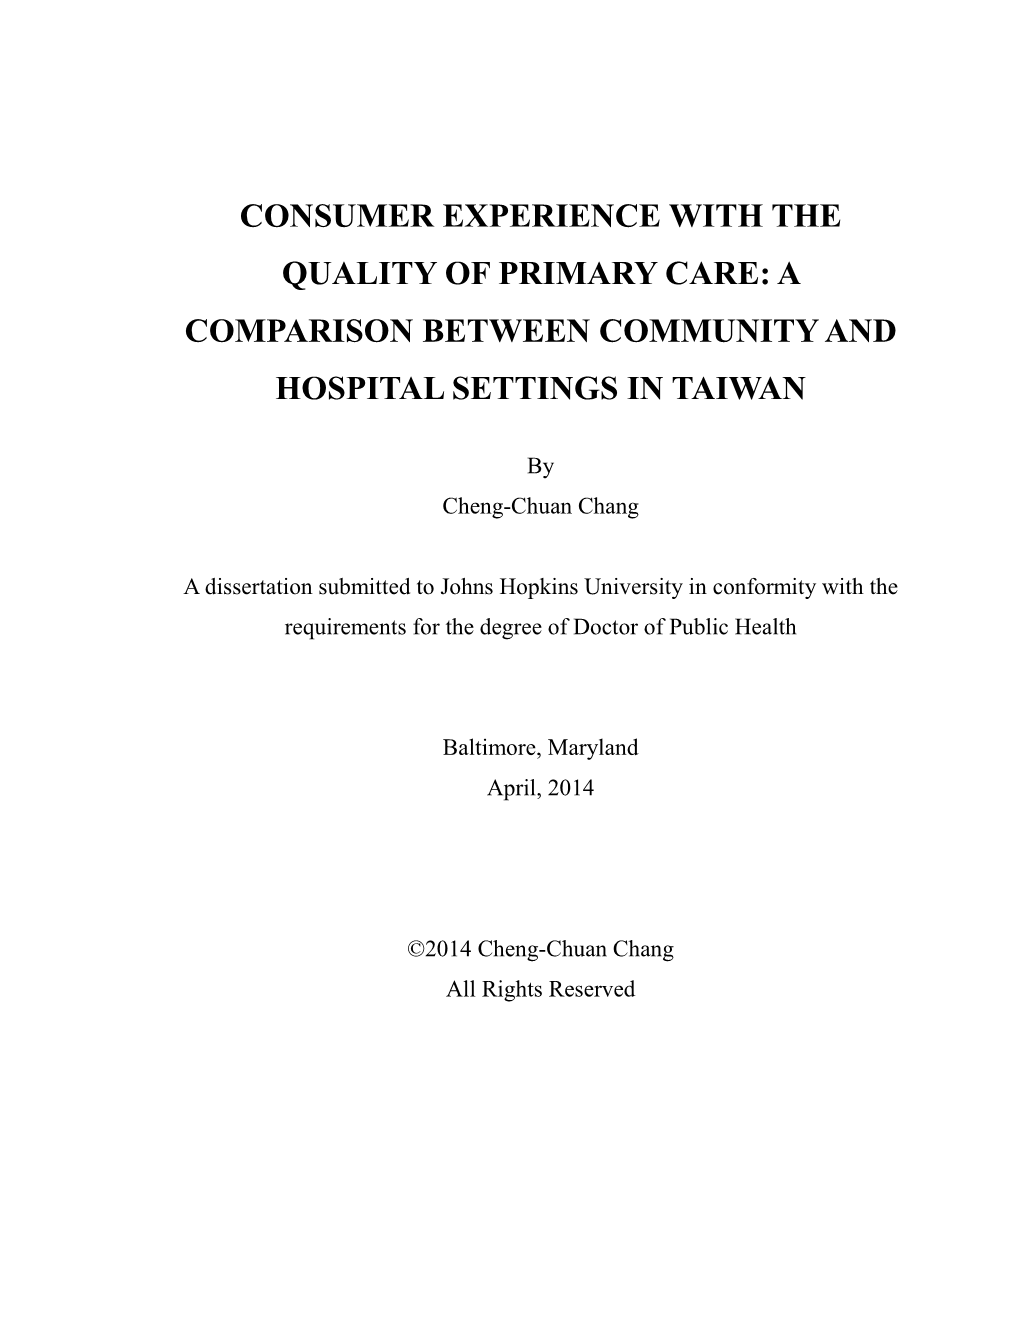 20130518-Consumer Experience of the Quality of Primary Care-A